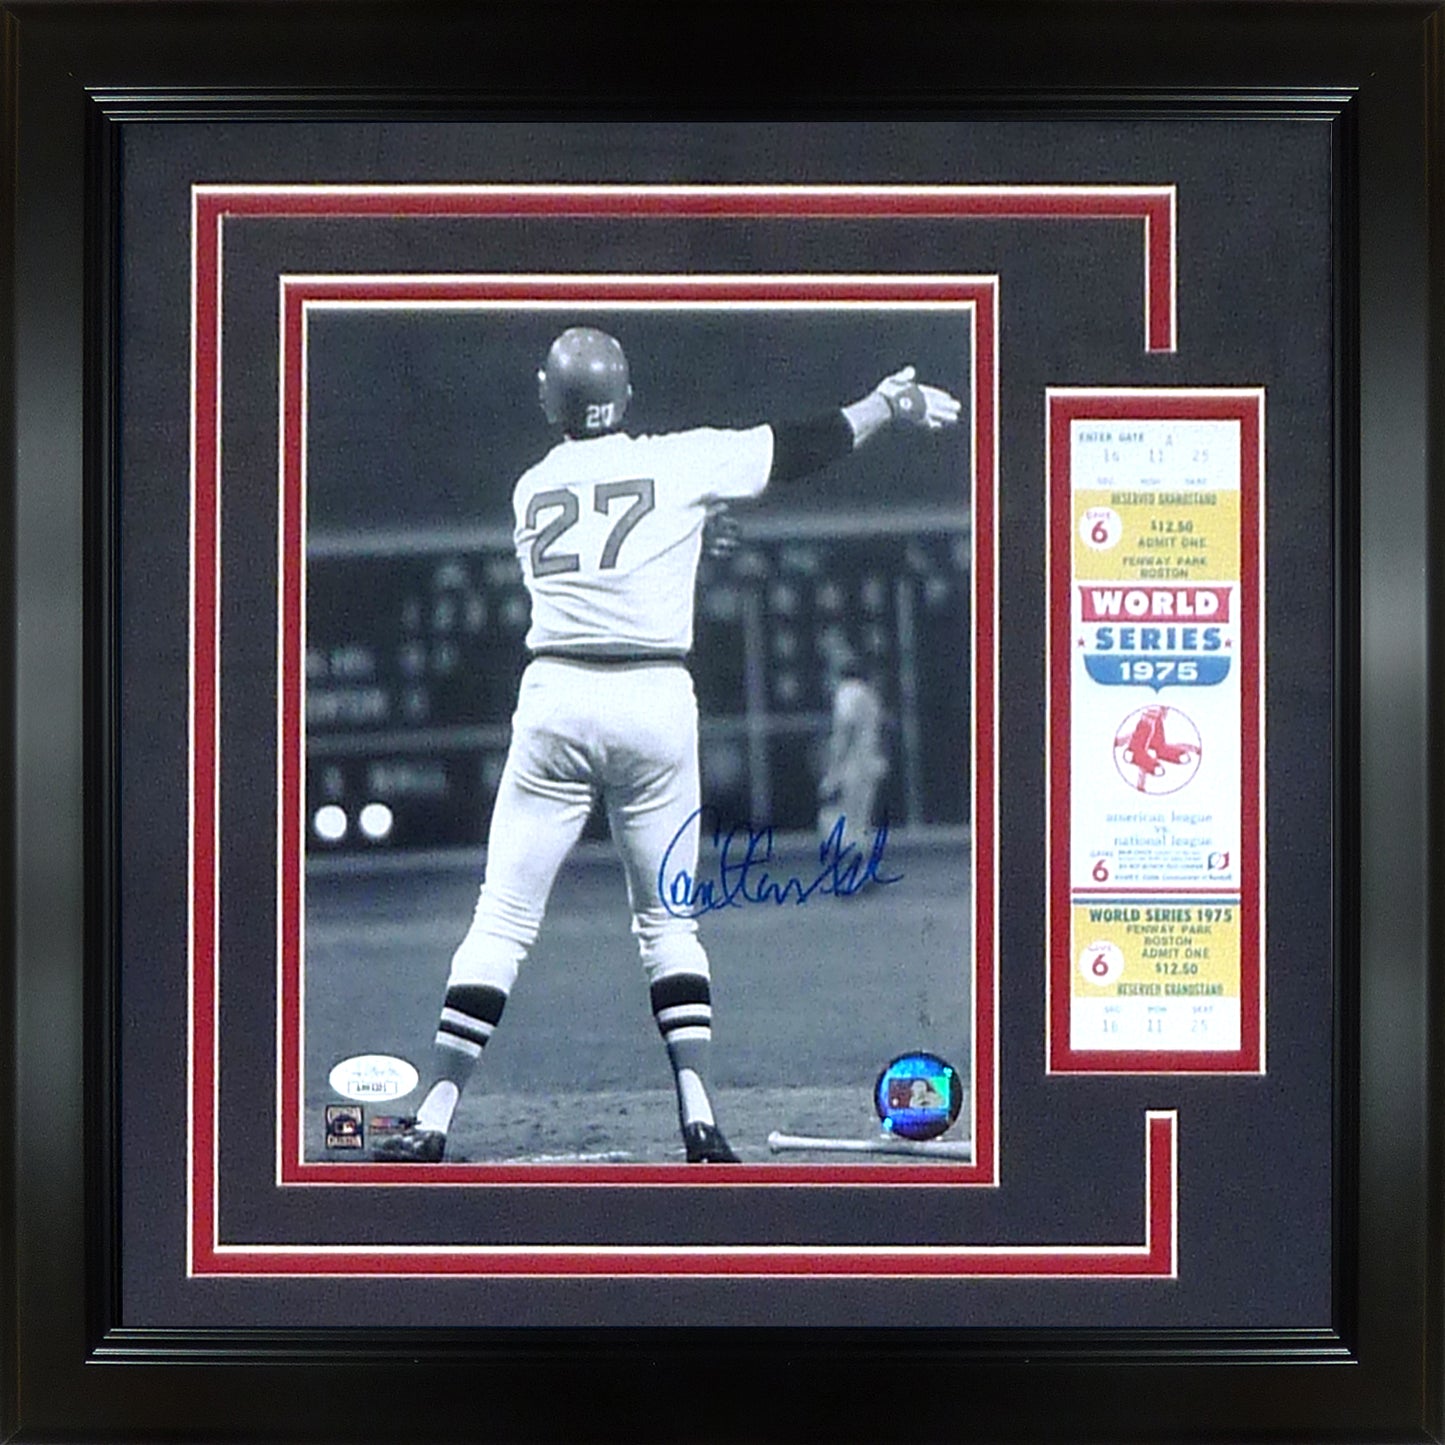 Carlton Fisk Autographed Boston Red Sox (1975 WS Home Run) Framed 8x10 Photo with Replica Ticket Stub - JSA